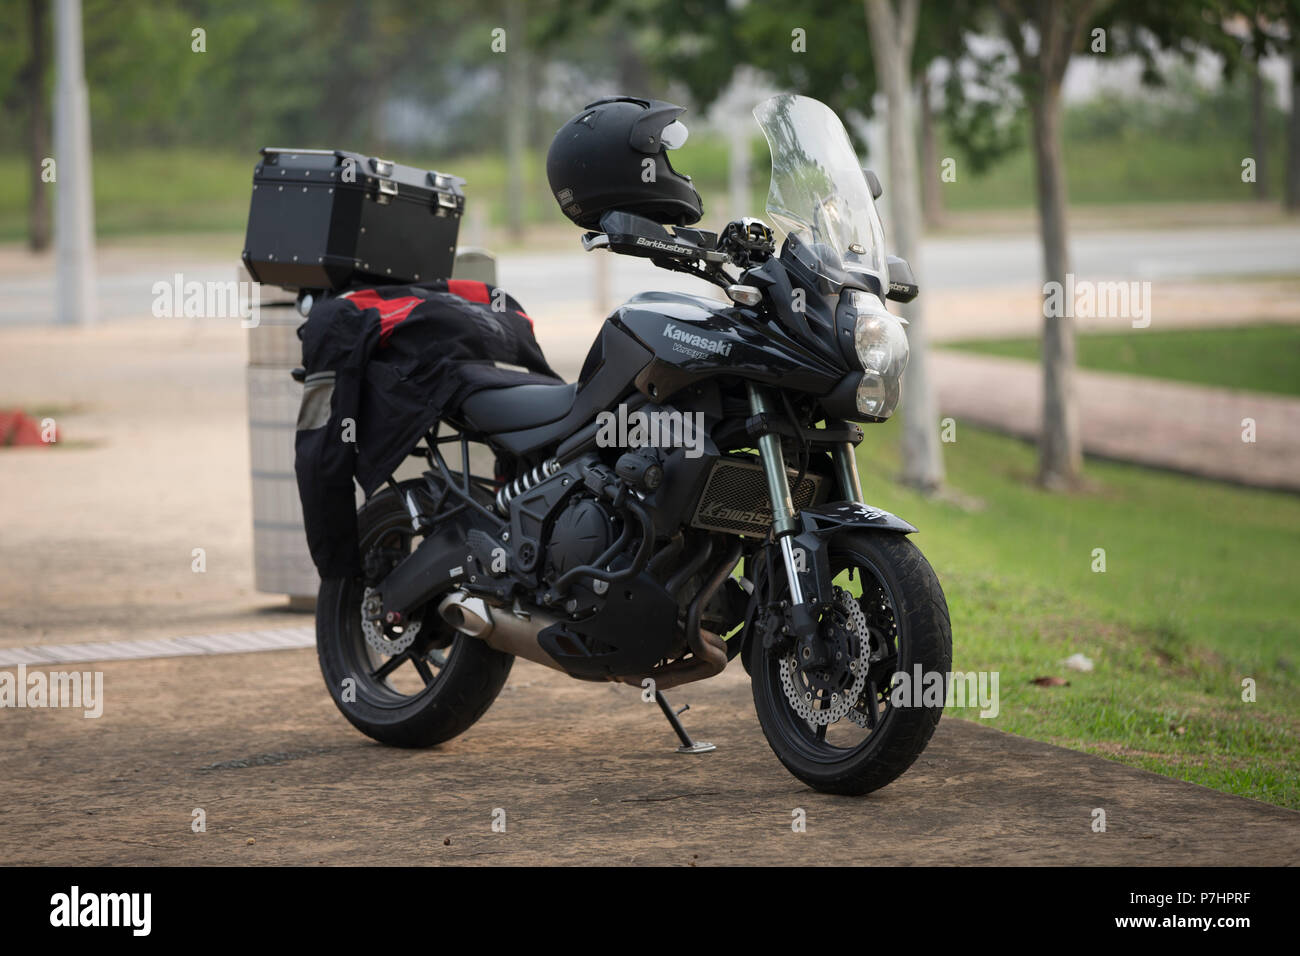 Kawasaki Versys 650 touring motorcycle parked on the side of the road Stock Photo - Alamy